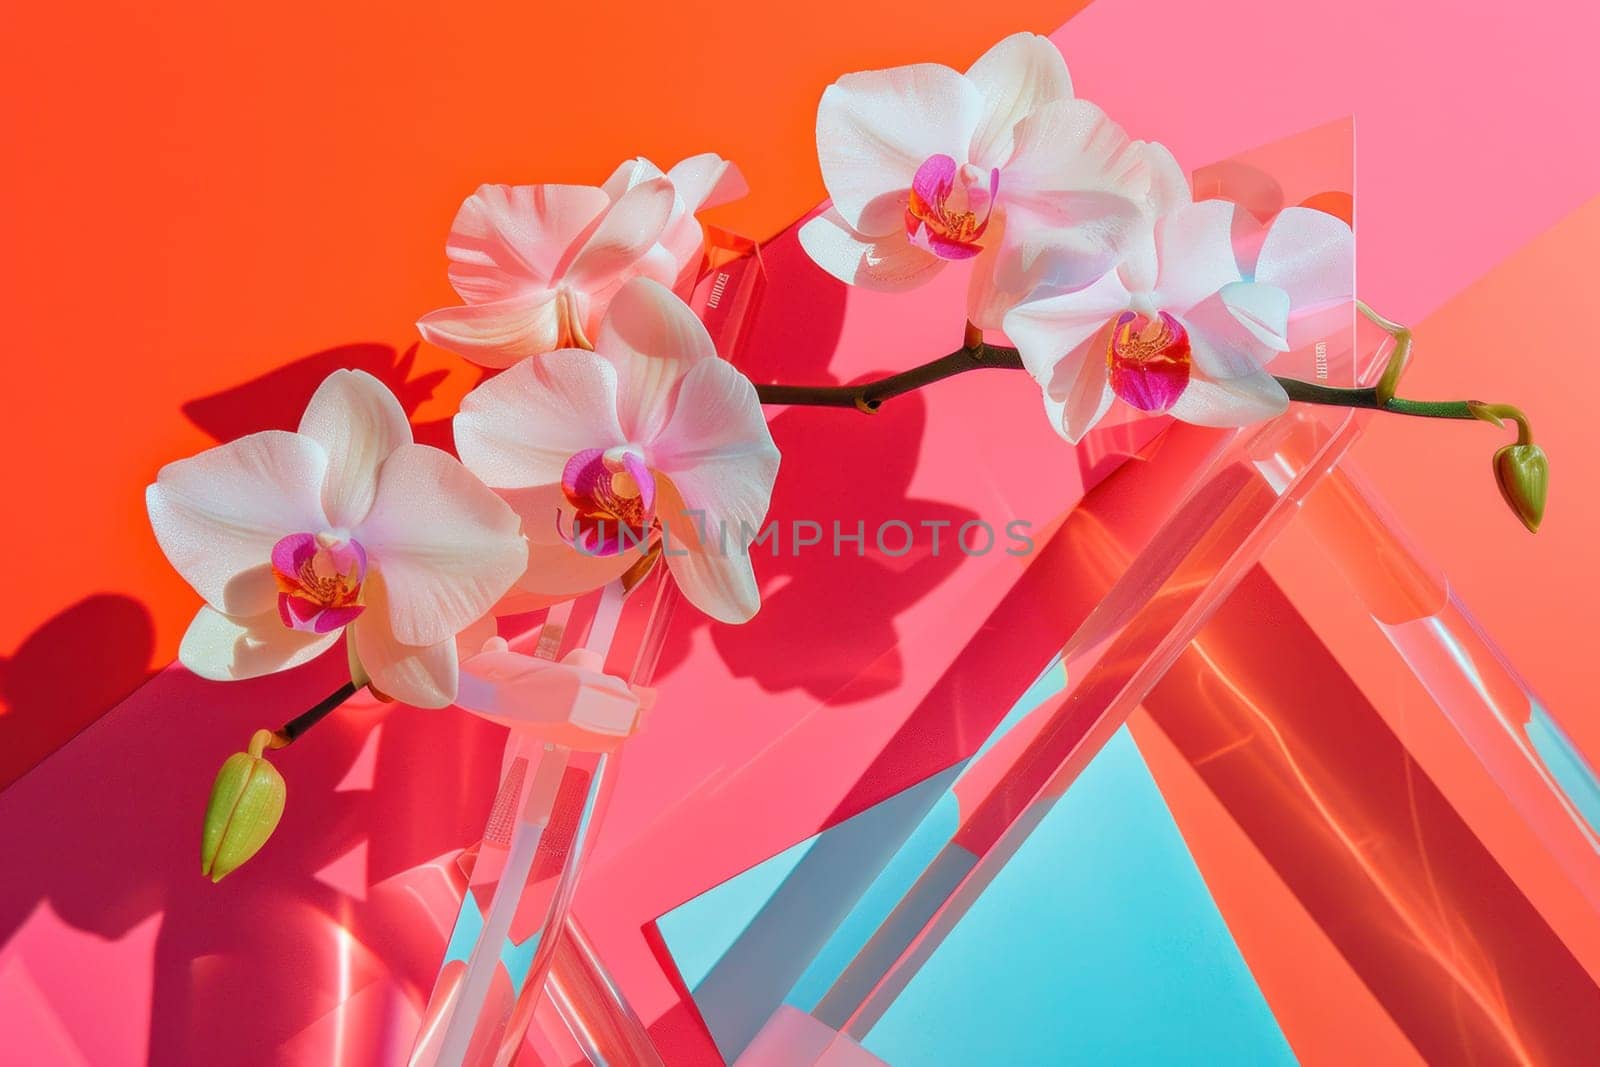 Exquisite white orchids in clear glass vase on vibrant orange and blue background for art and beauty theme